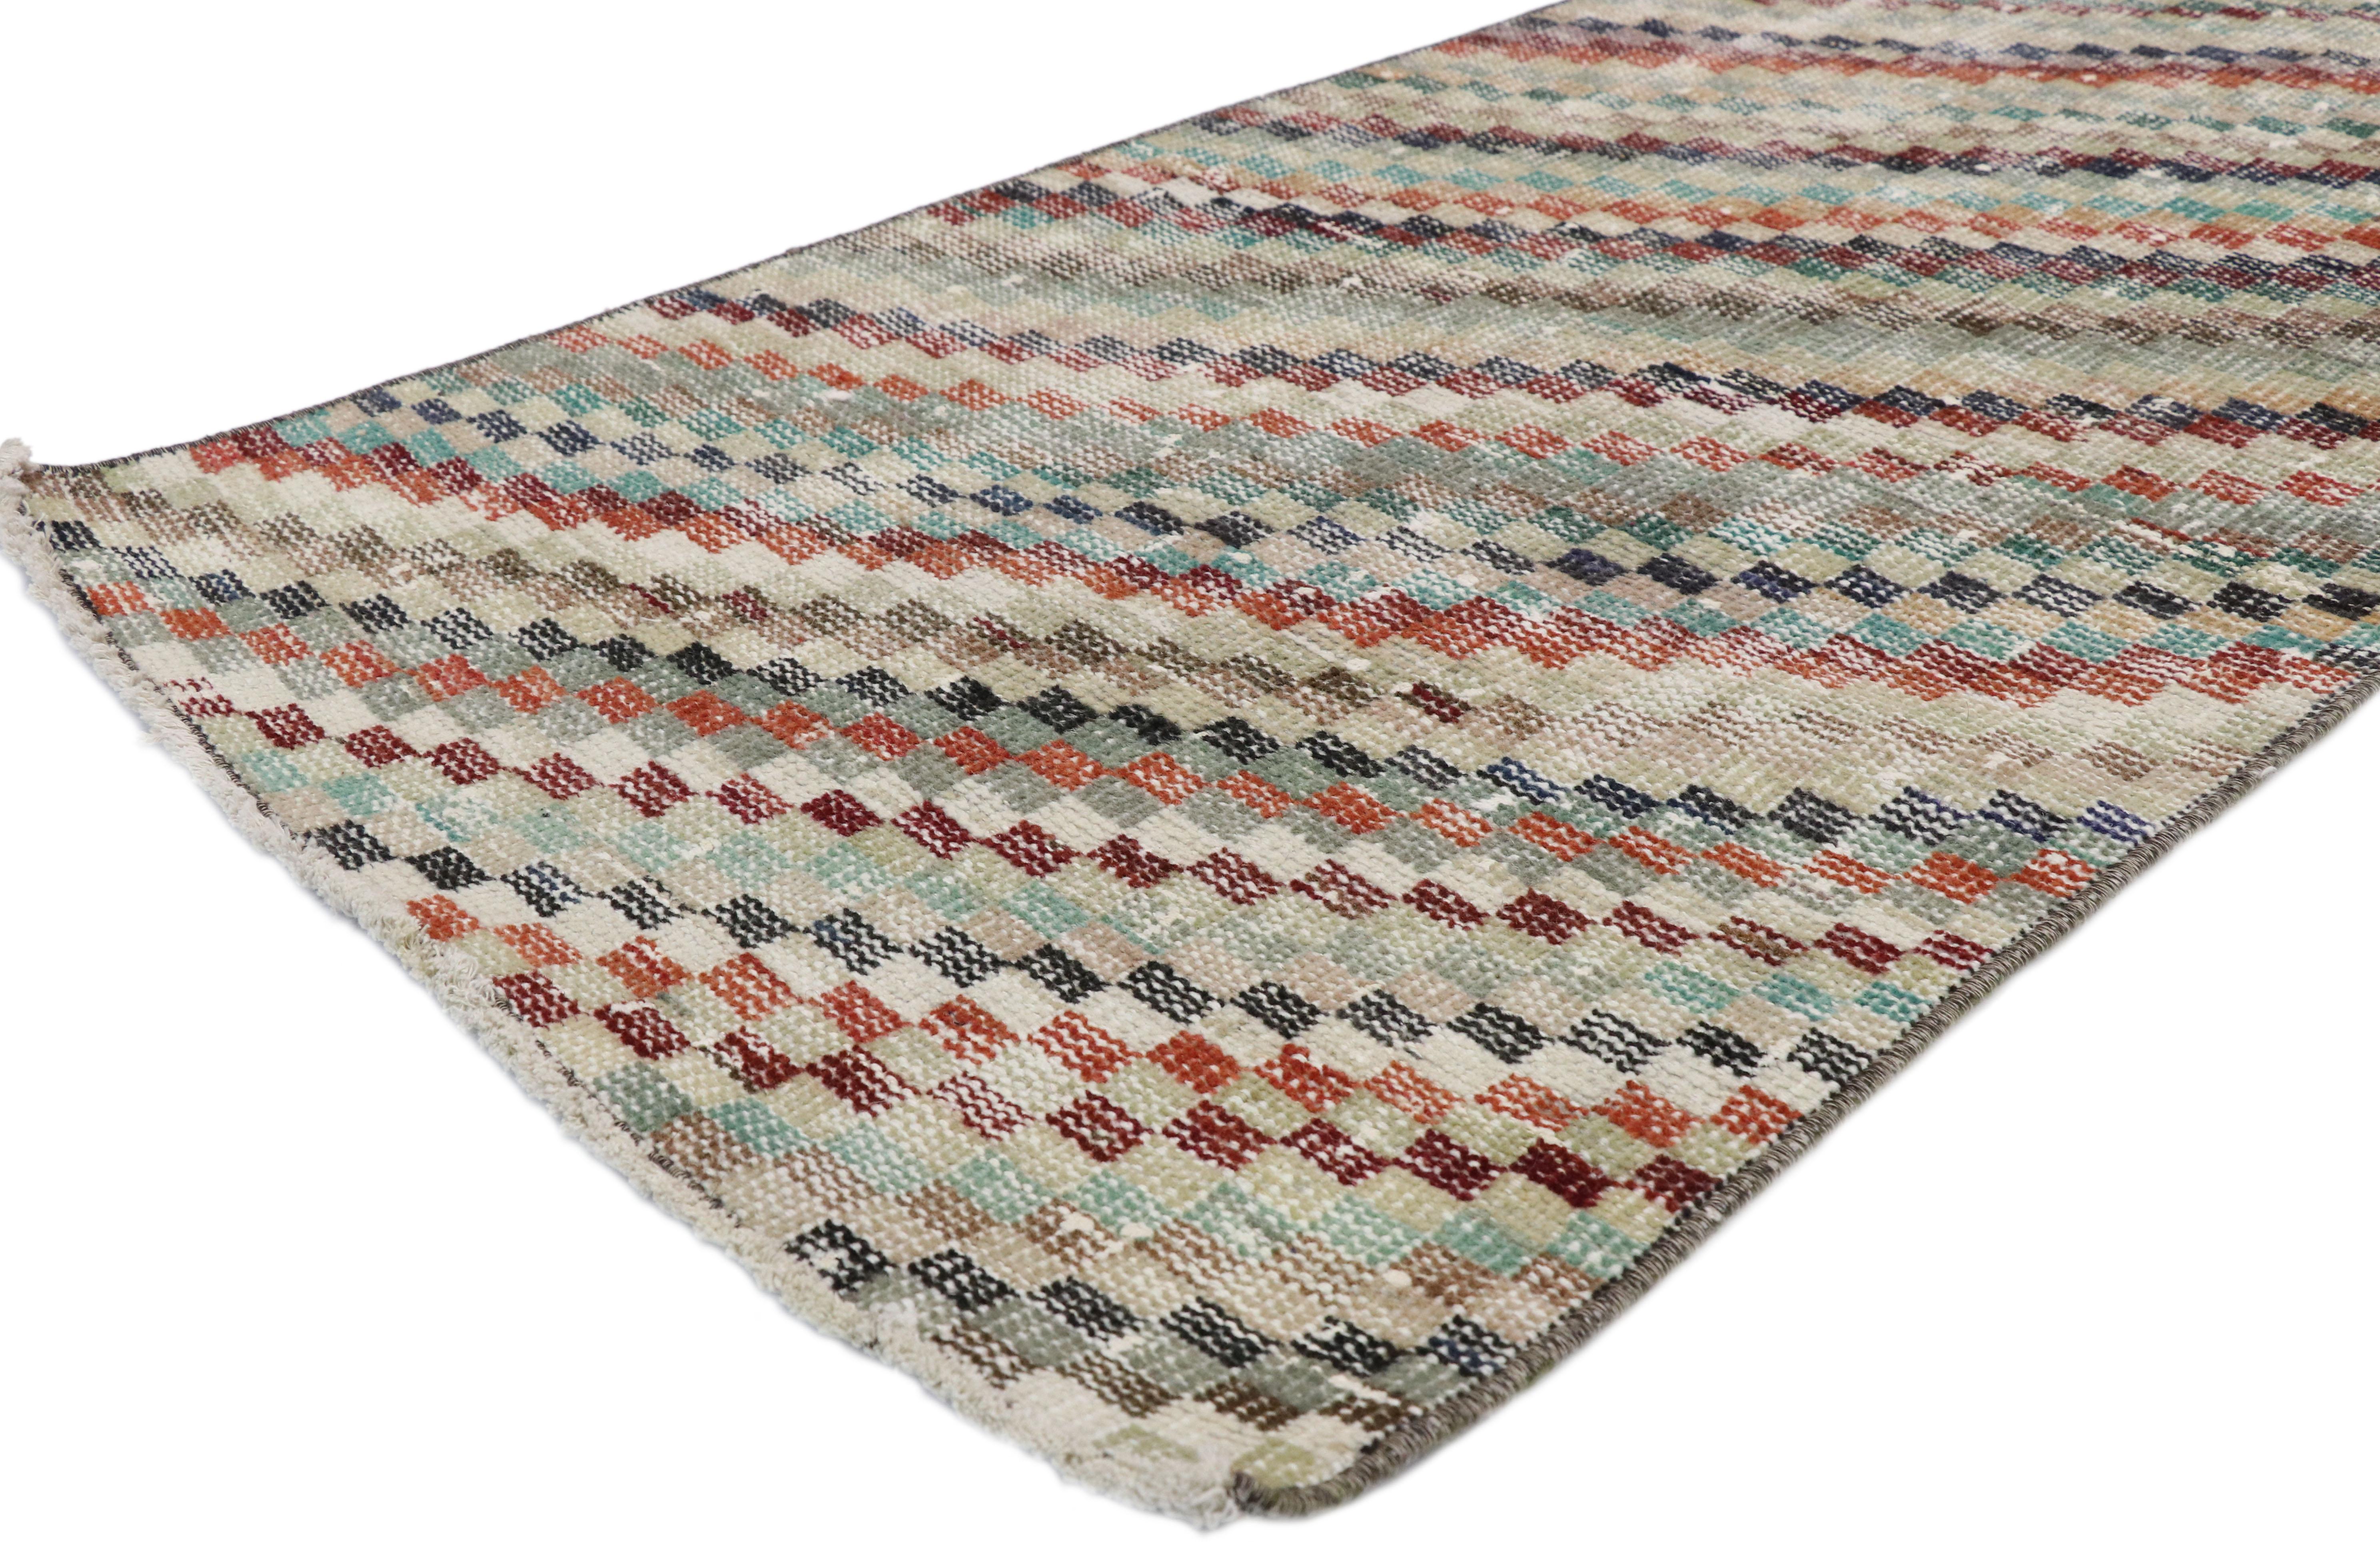 52193 Distressed Vintage Turkish Sivas Runner with Art Deco Style, Narrow Runner. Warm and inviting combined with a bold pattern, this hand knotted wool distressed vintage Turkish Sivas rug embodies bold Art Deco style with a modern artisan twist.